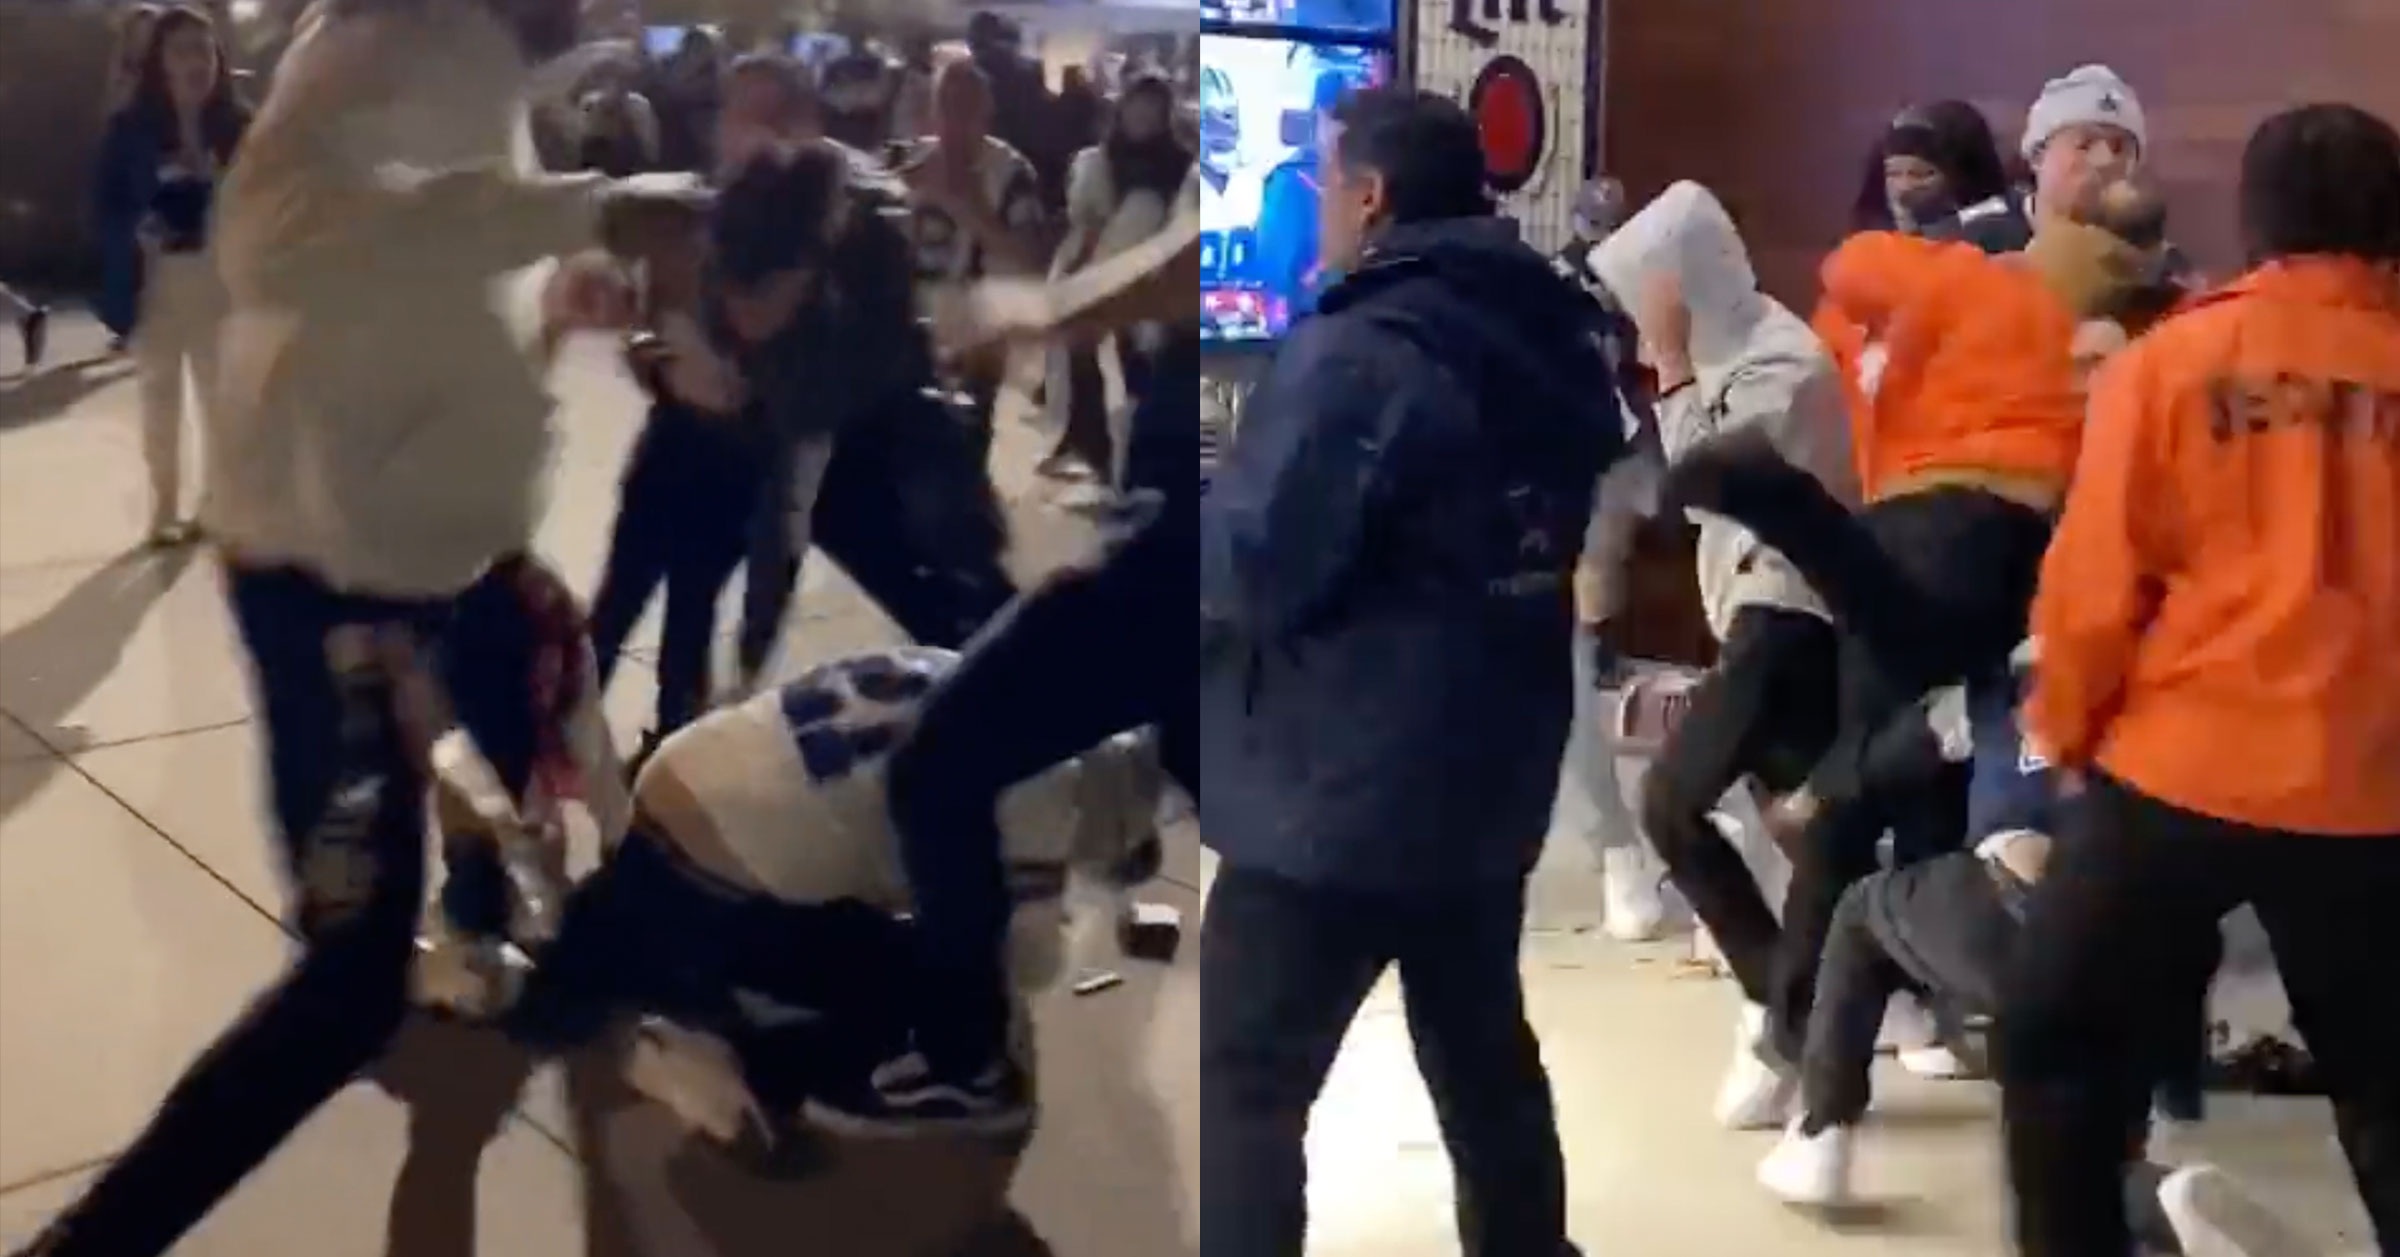 Cowboys Fans Couldn't Stop Fighting Each Other At AT&T Stadium Watch Party  As Multiple Brawls Break Out (VIDEOS)